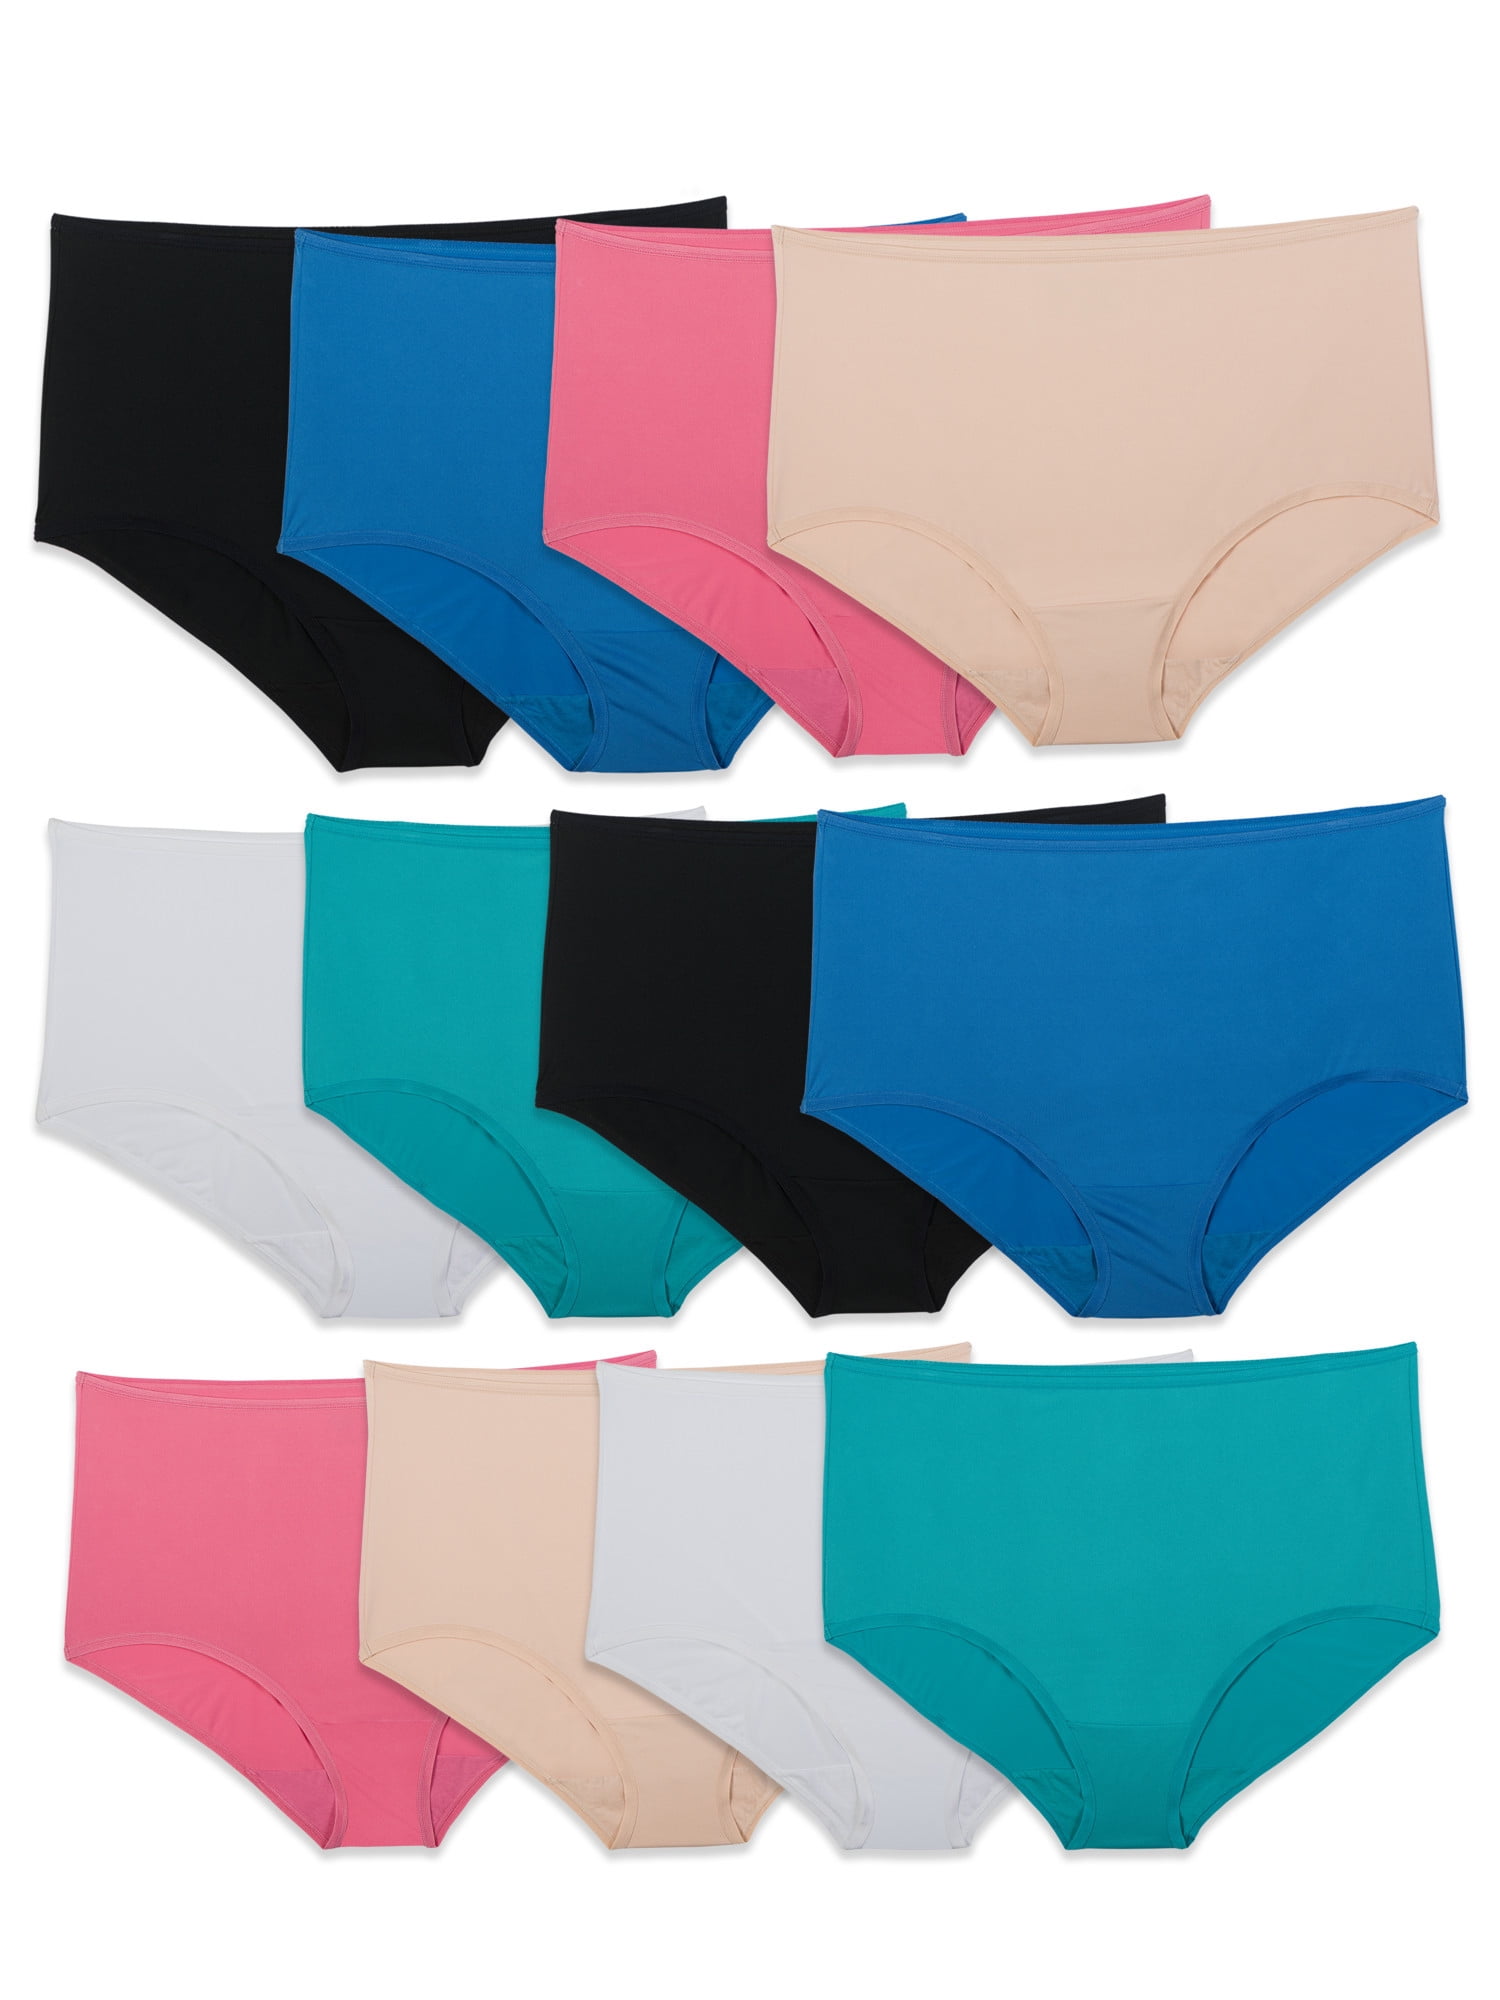 Details about  / Fruit of The Loom Women/'s Microfiber Underwear Multipack Assorted